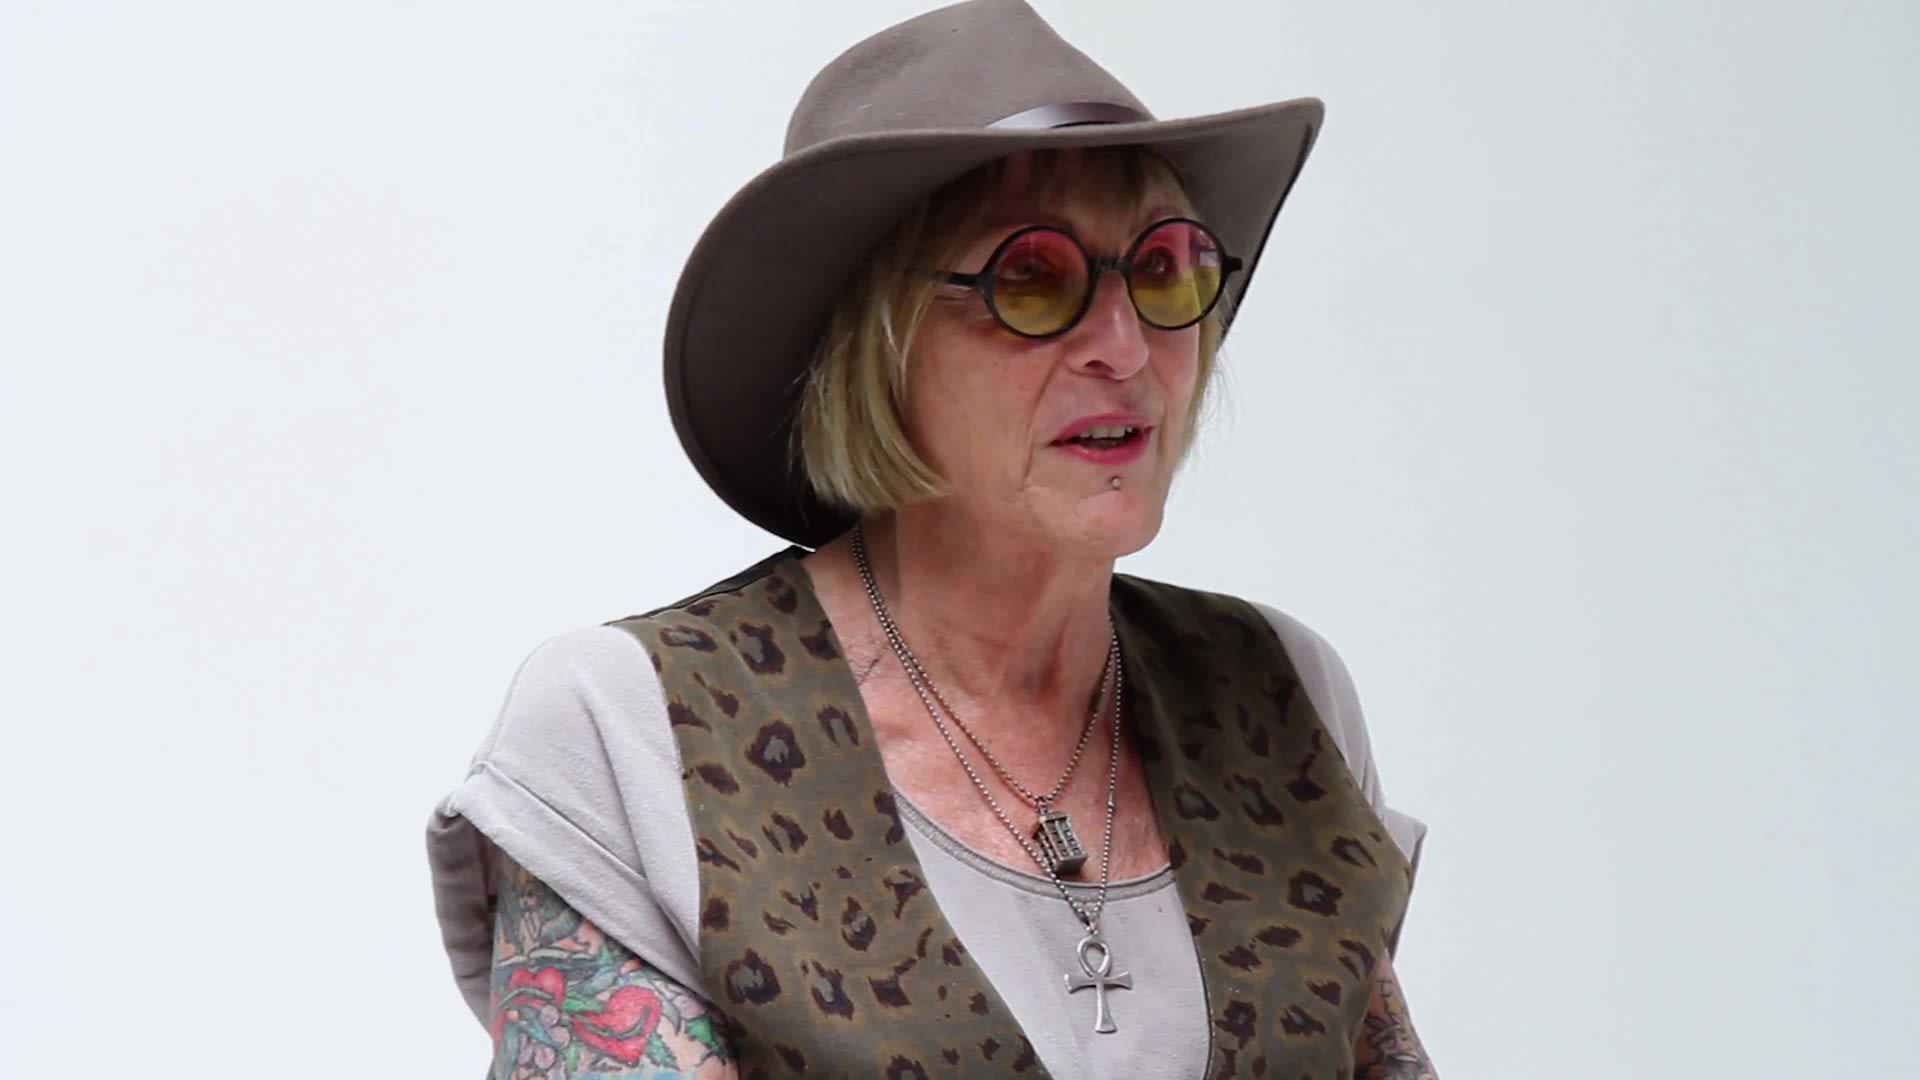 Watch How Activist Kate Bornstein Realized They re Neither A Man Nor A Woman Dispelling Beauty